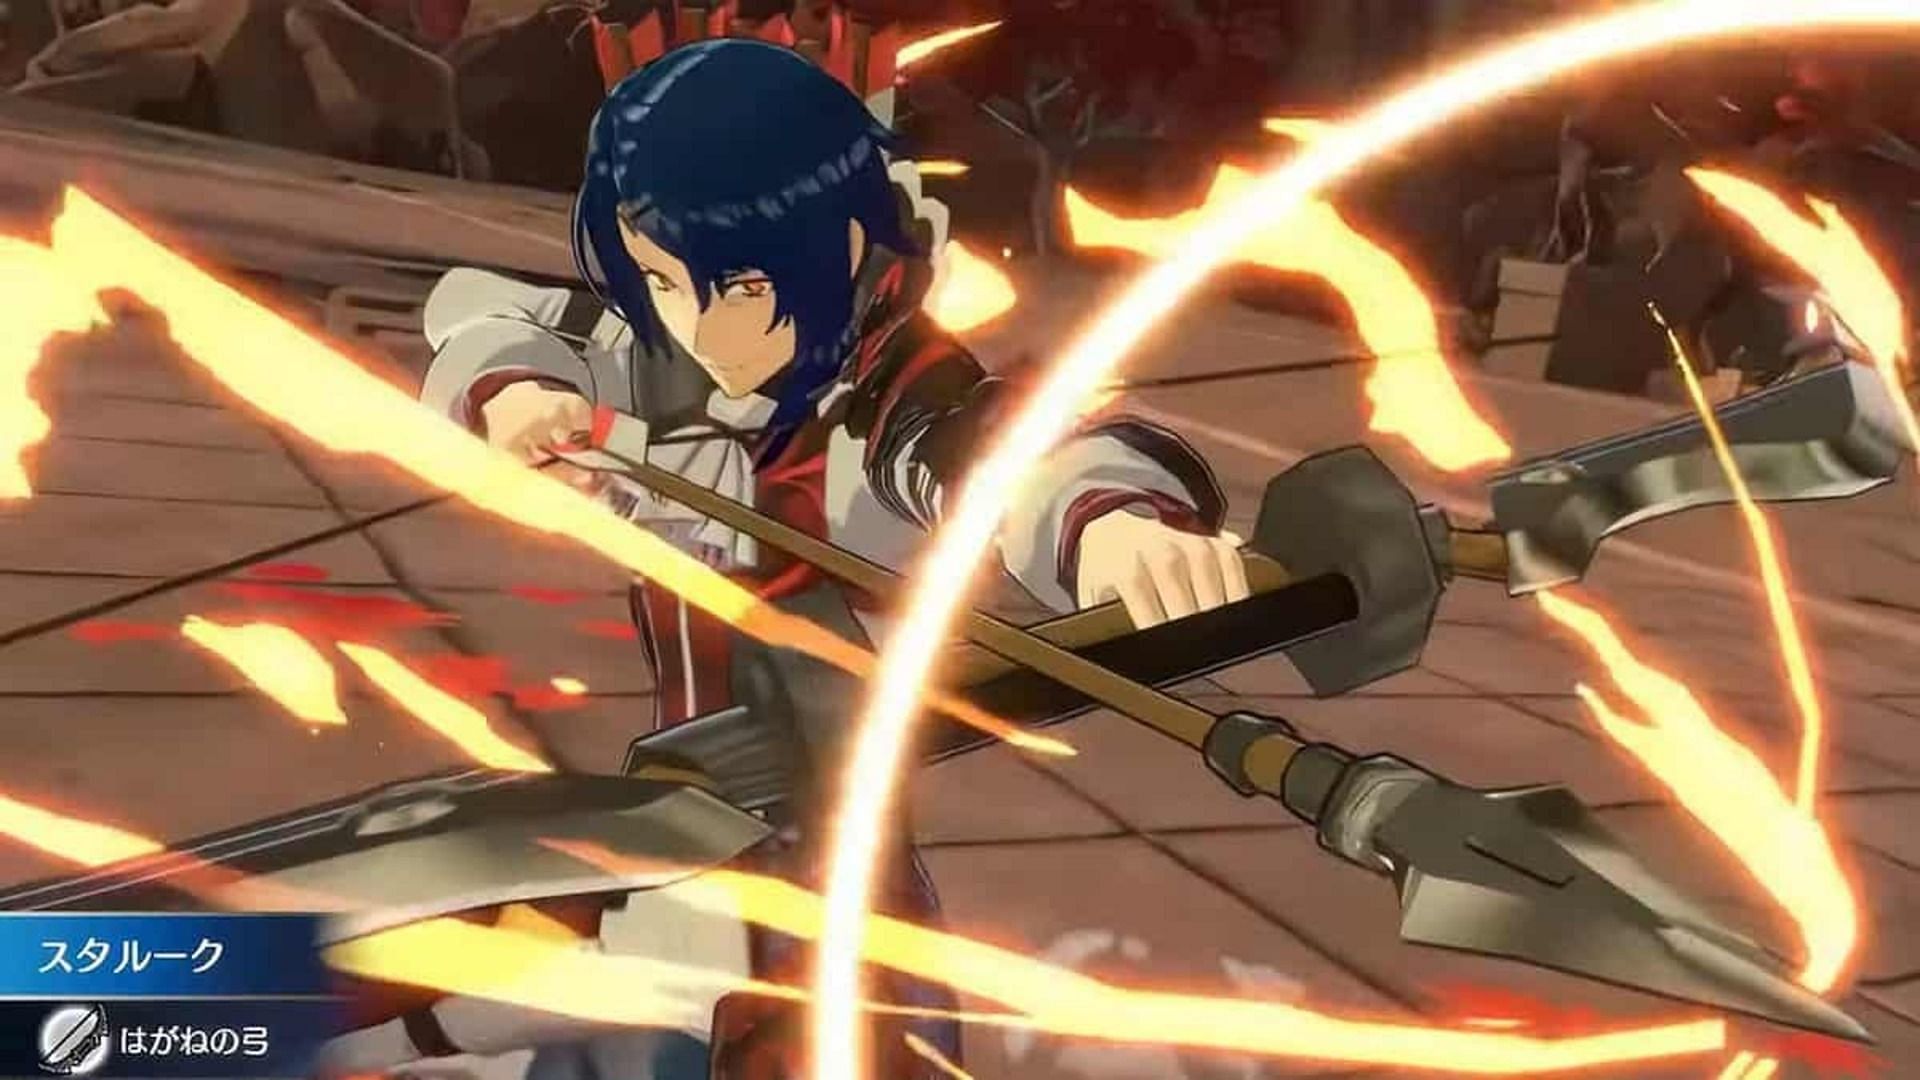 Alcryst firing a bow in Fire Emblem Engage (Image via Nintendo)